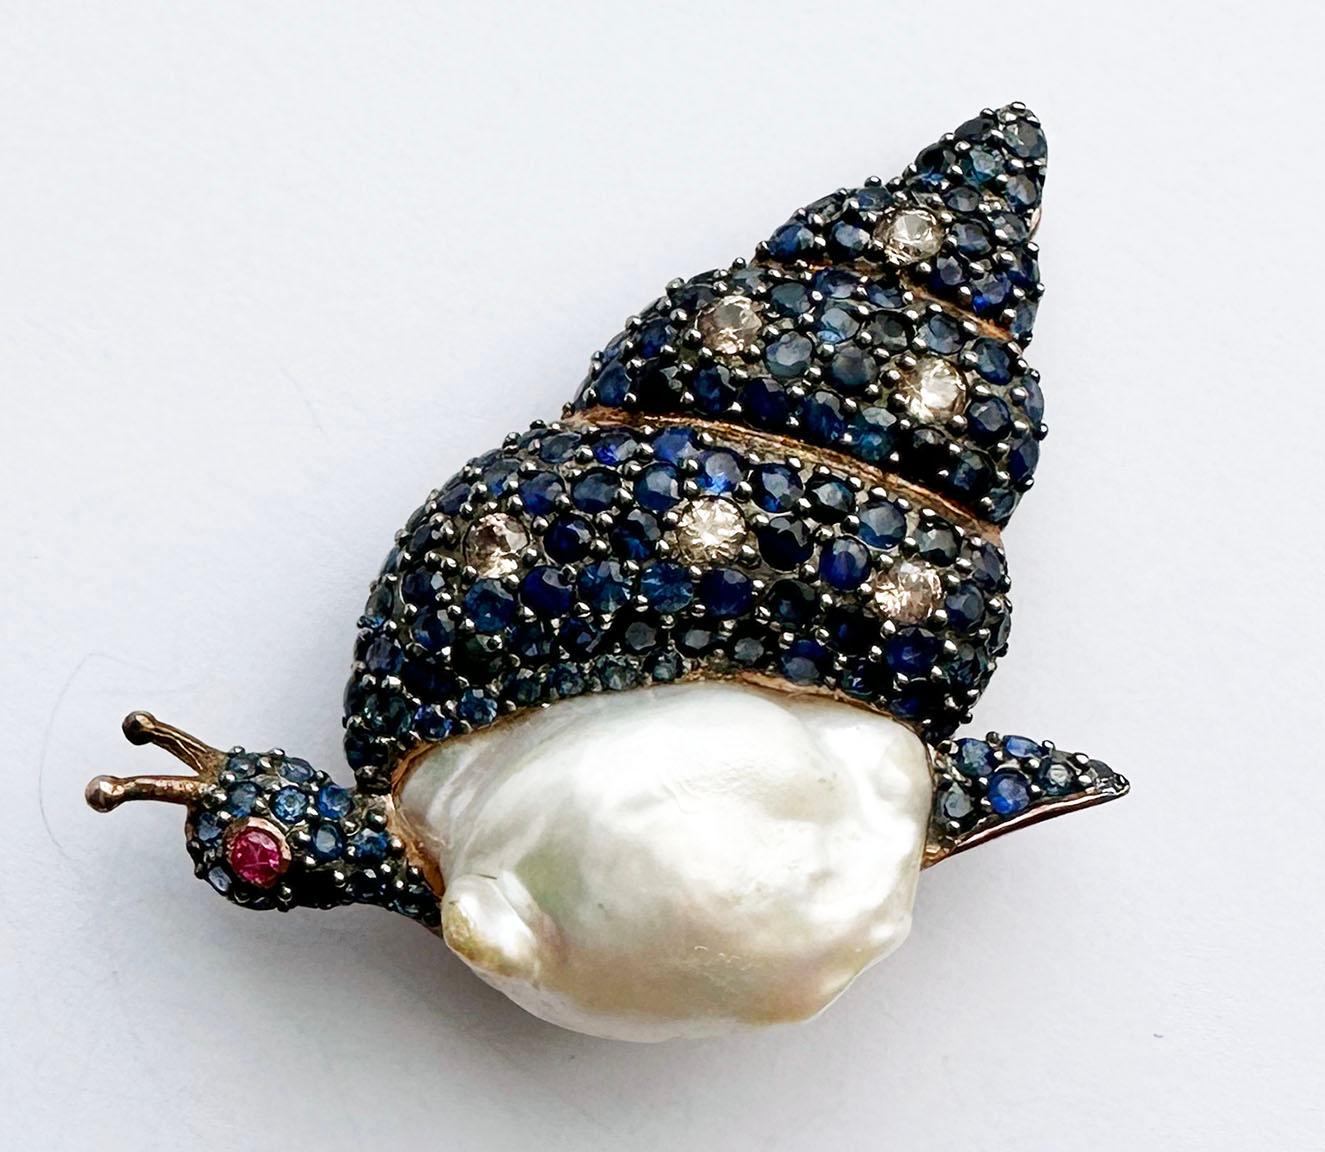 A Blackened and Rose Gold Plated, Silver Snail Brooch/Pendant set with Sapphire, Ruby, Zircon and South Sea Pearl. This brooch is also a pendant with a fold down loop bail. Plated in blackened Silver and Rose Gold, the snail's shell is a lovely pave